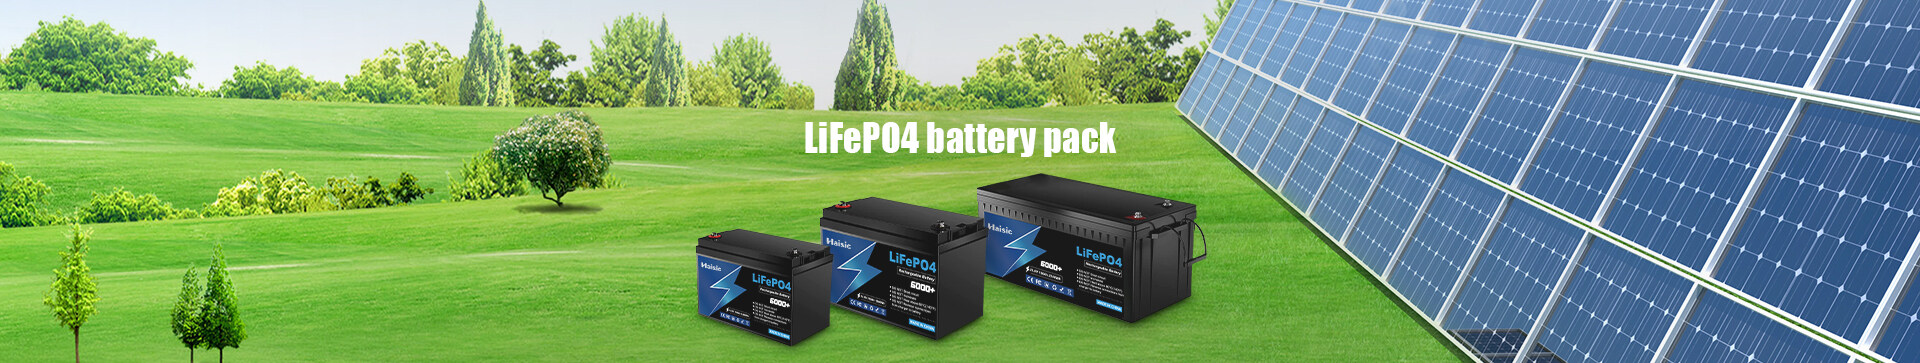 china lifepo4 lithium battery pack manufacturer, china lifepo4 lithium battery pack supplier, lifepo4 lithium battery pack factory ,lifepo4 lithium battery pack manufacturer ,custom lifepo4 battery packs